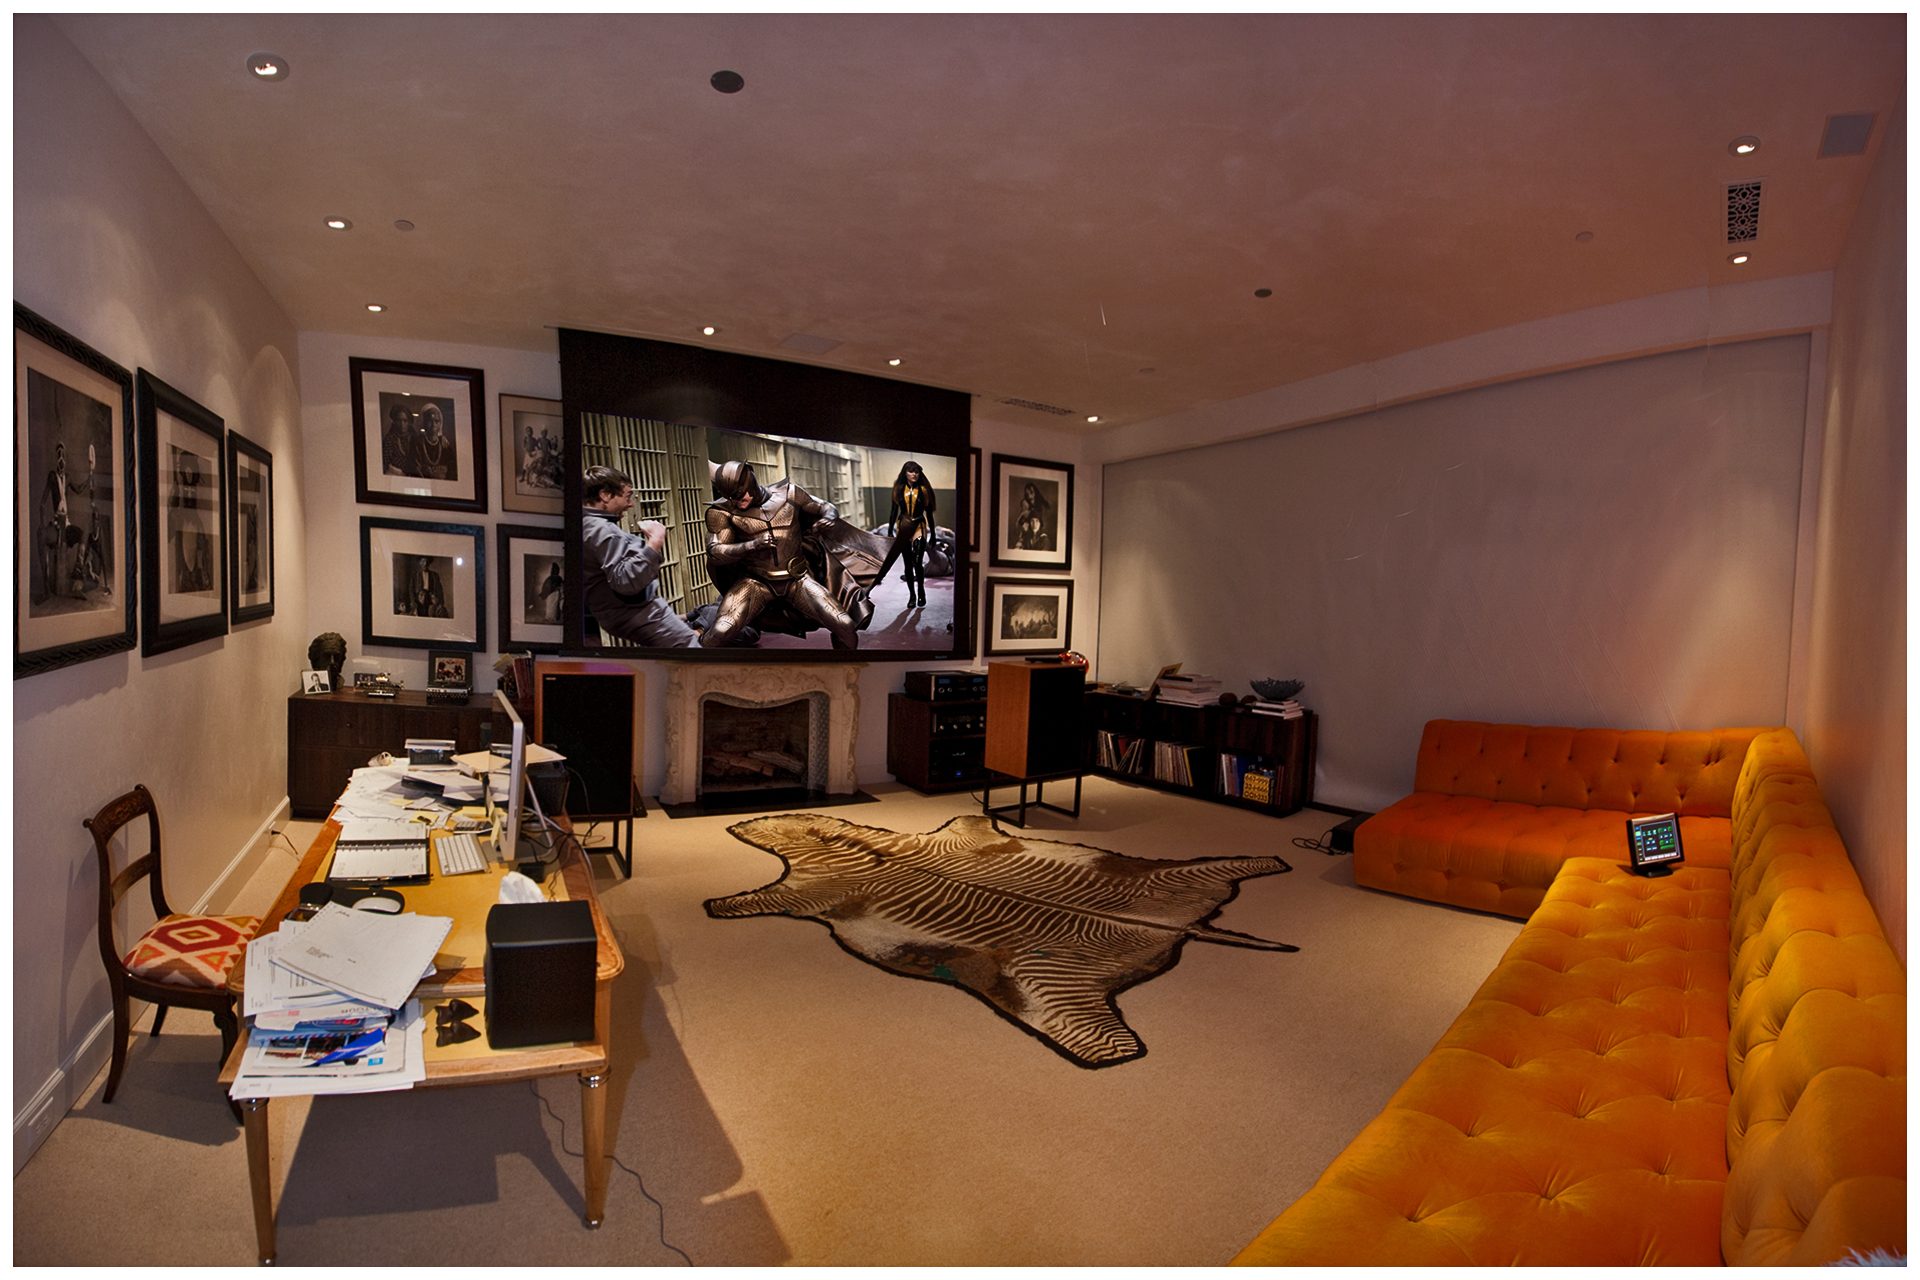 THEATER IN A DEDICATED ROOMOur Client’s desire for high-end Music and a large screen were combined into this office workspace where he was able to listen to music, watch video, and work.